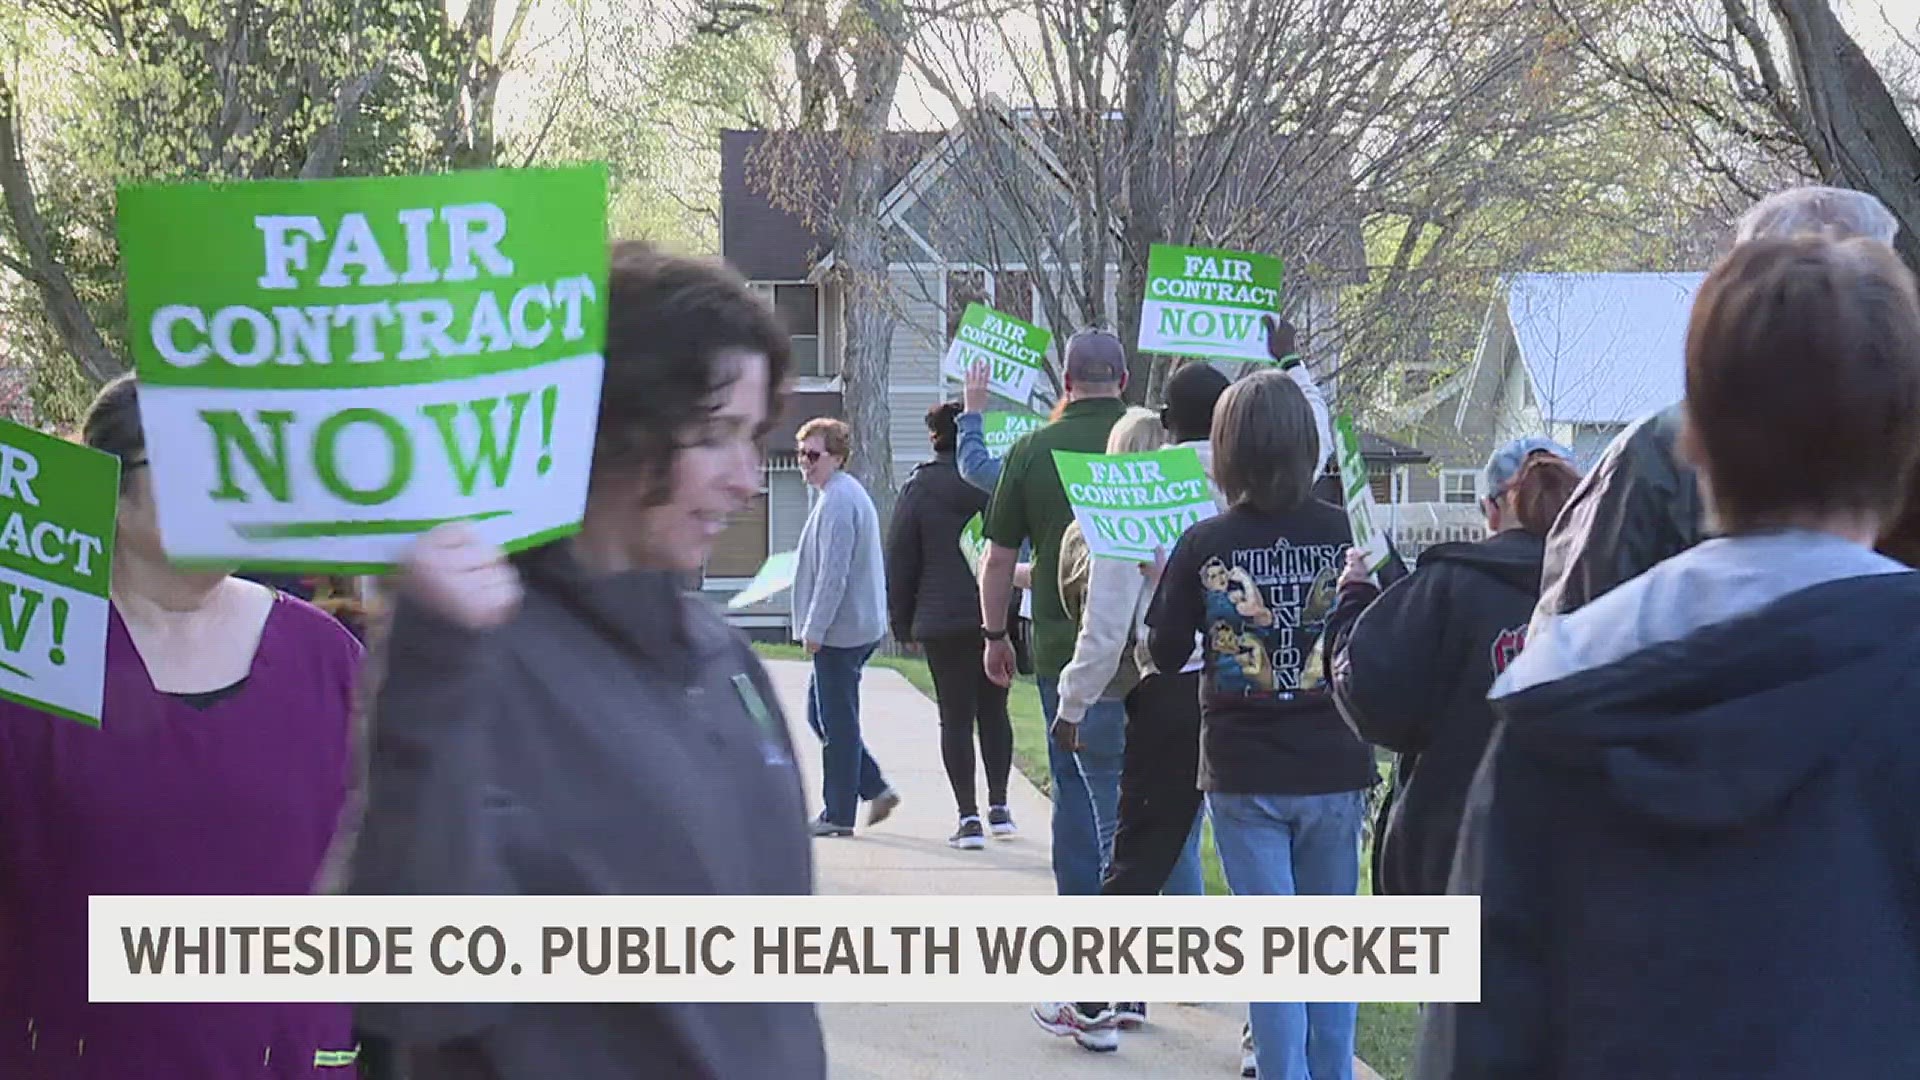 According to AFSCME 31, the union representing the health workers, management has been stalling contract negotiations since March 2022.